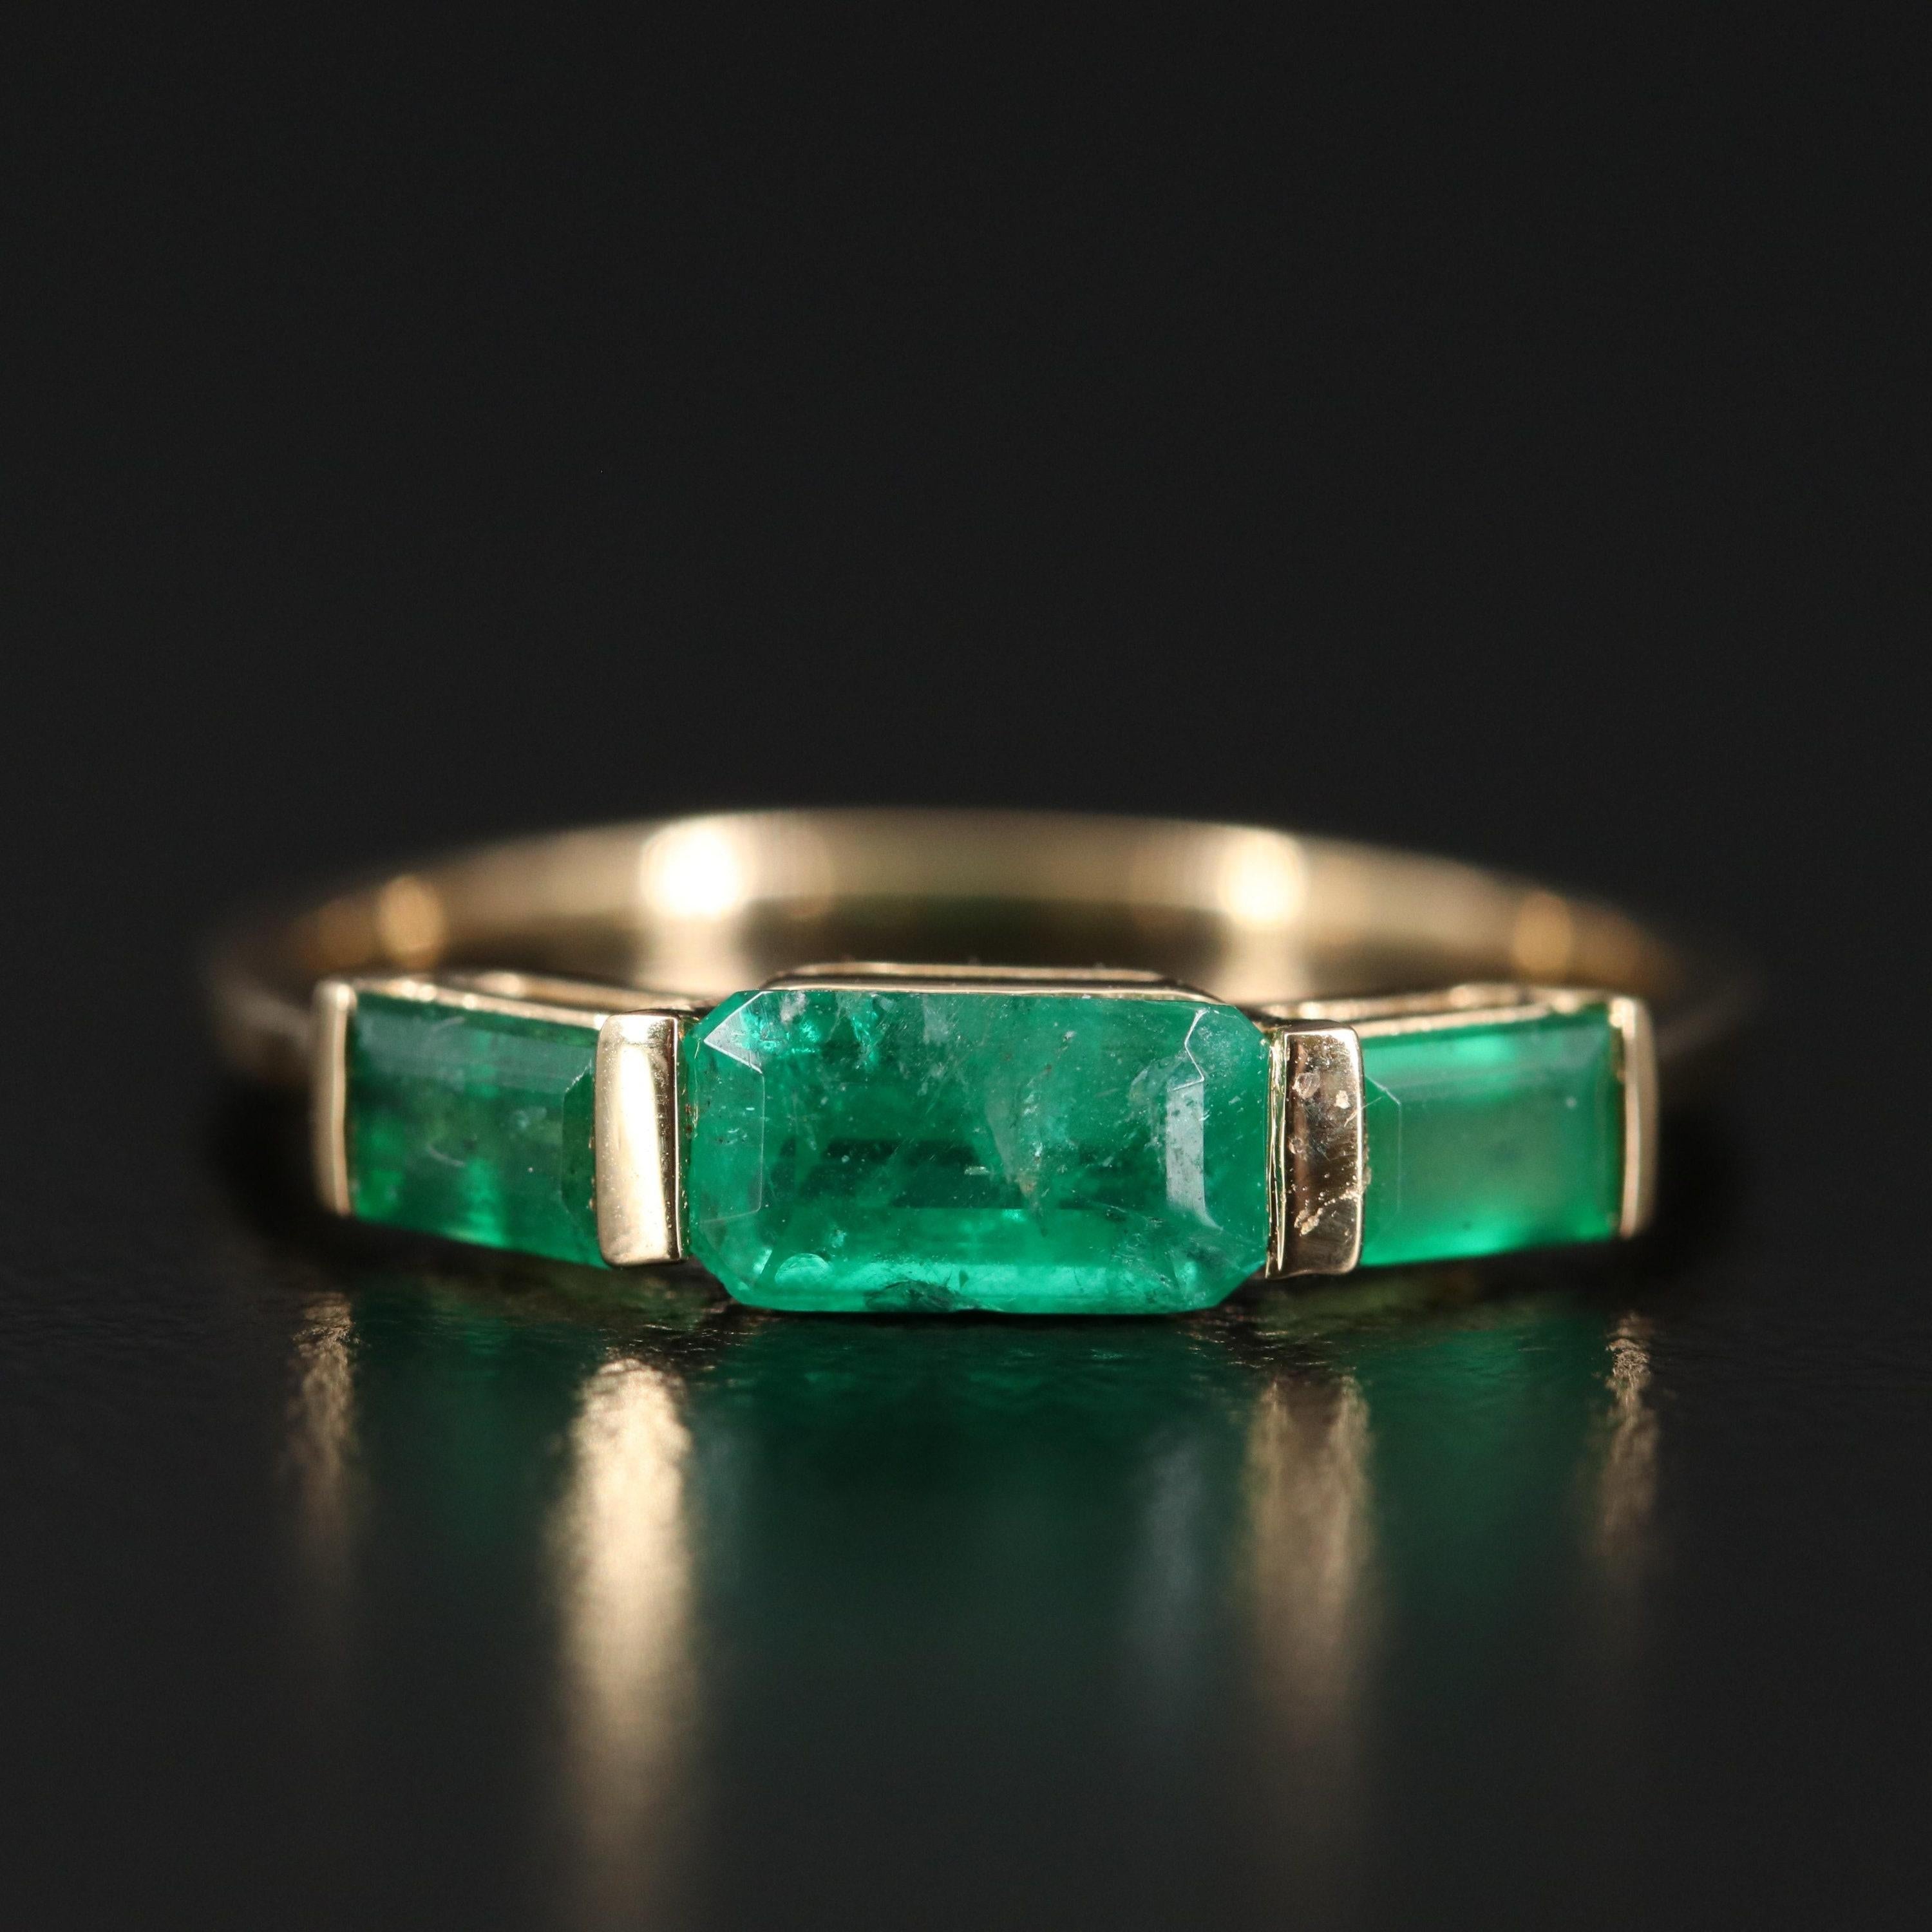 For Sale:  18K Gold 3 CT Natural Emerald Art Deco Style Engagement Ring, Fashion Band Rings 7